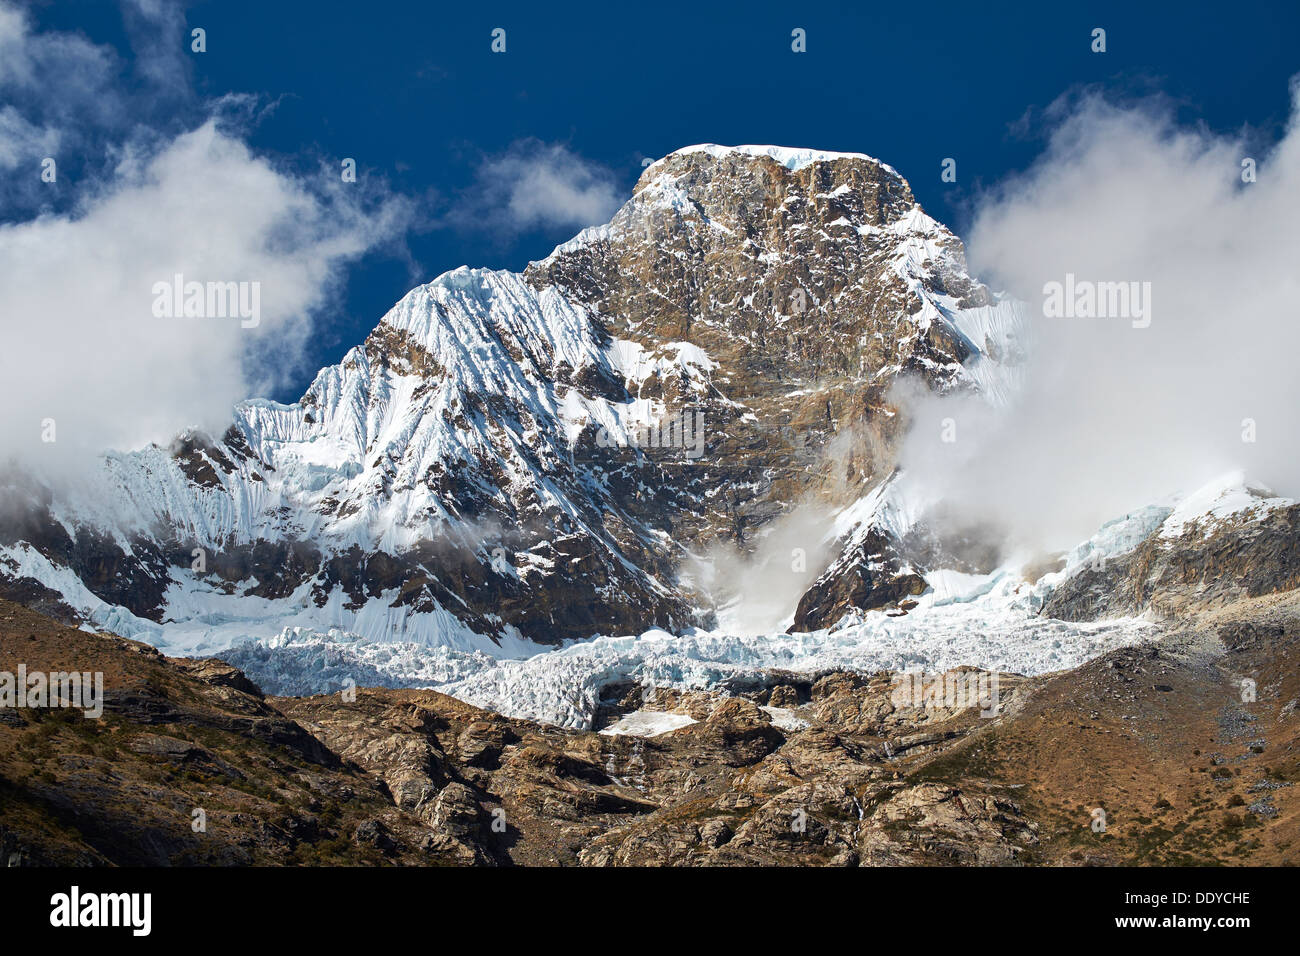 The summit of Huascaran in the Huascarán National Park, Peruvian Andes. Stock Photo